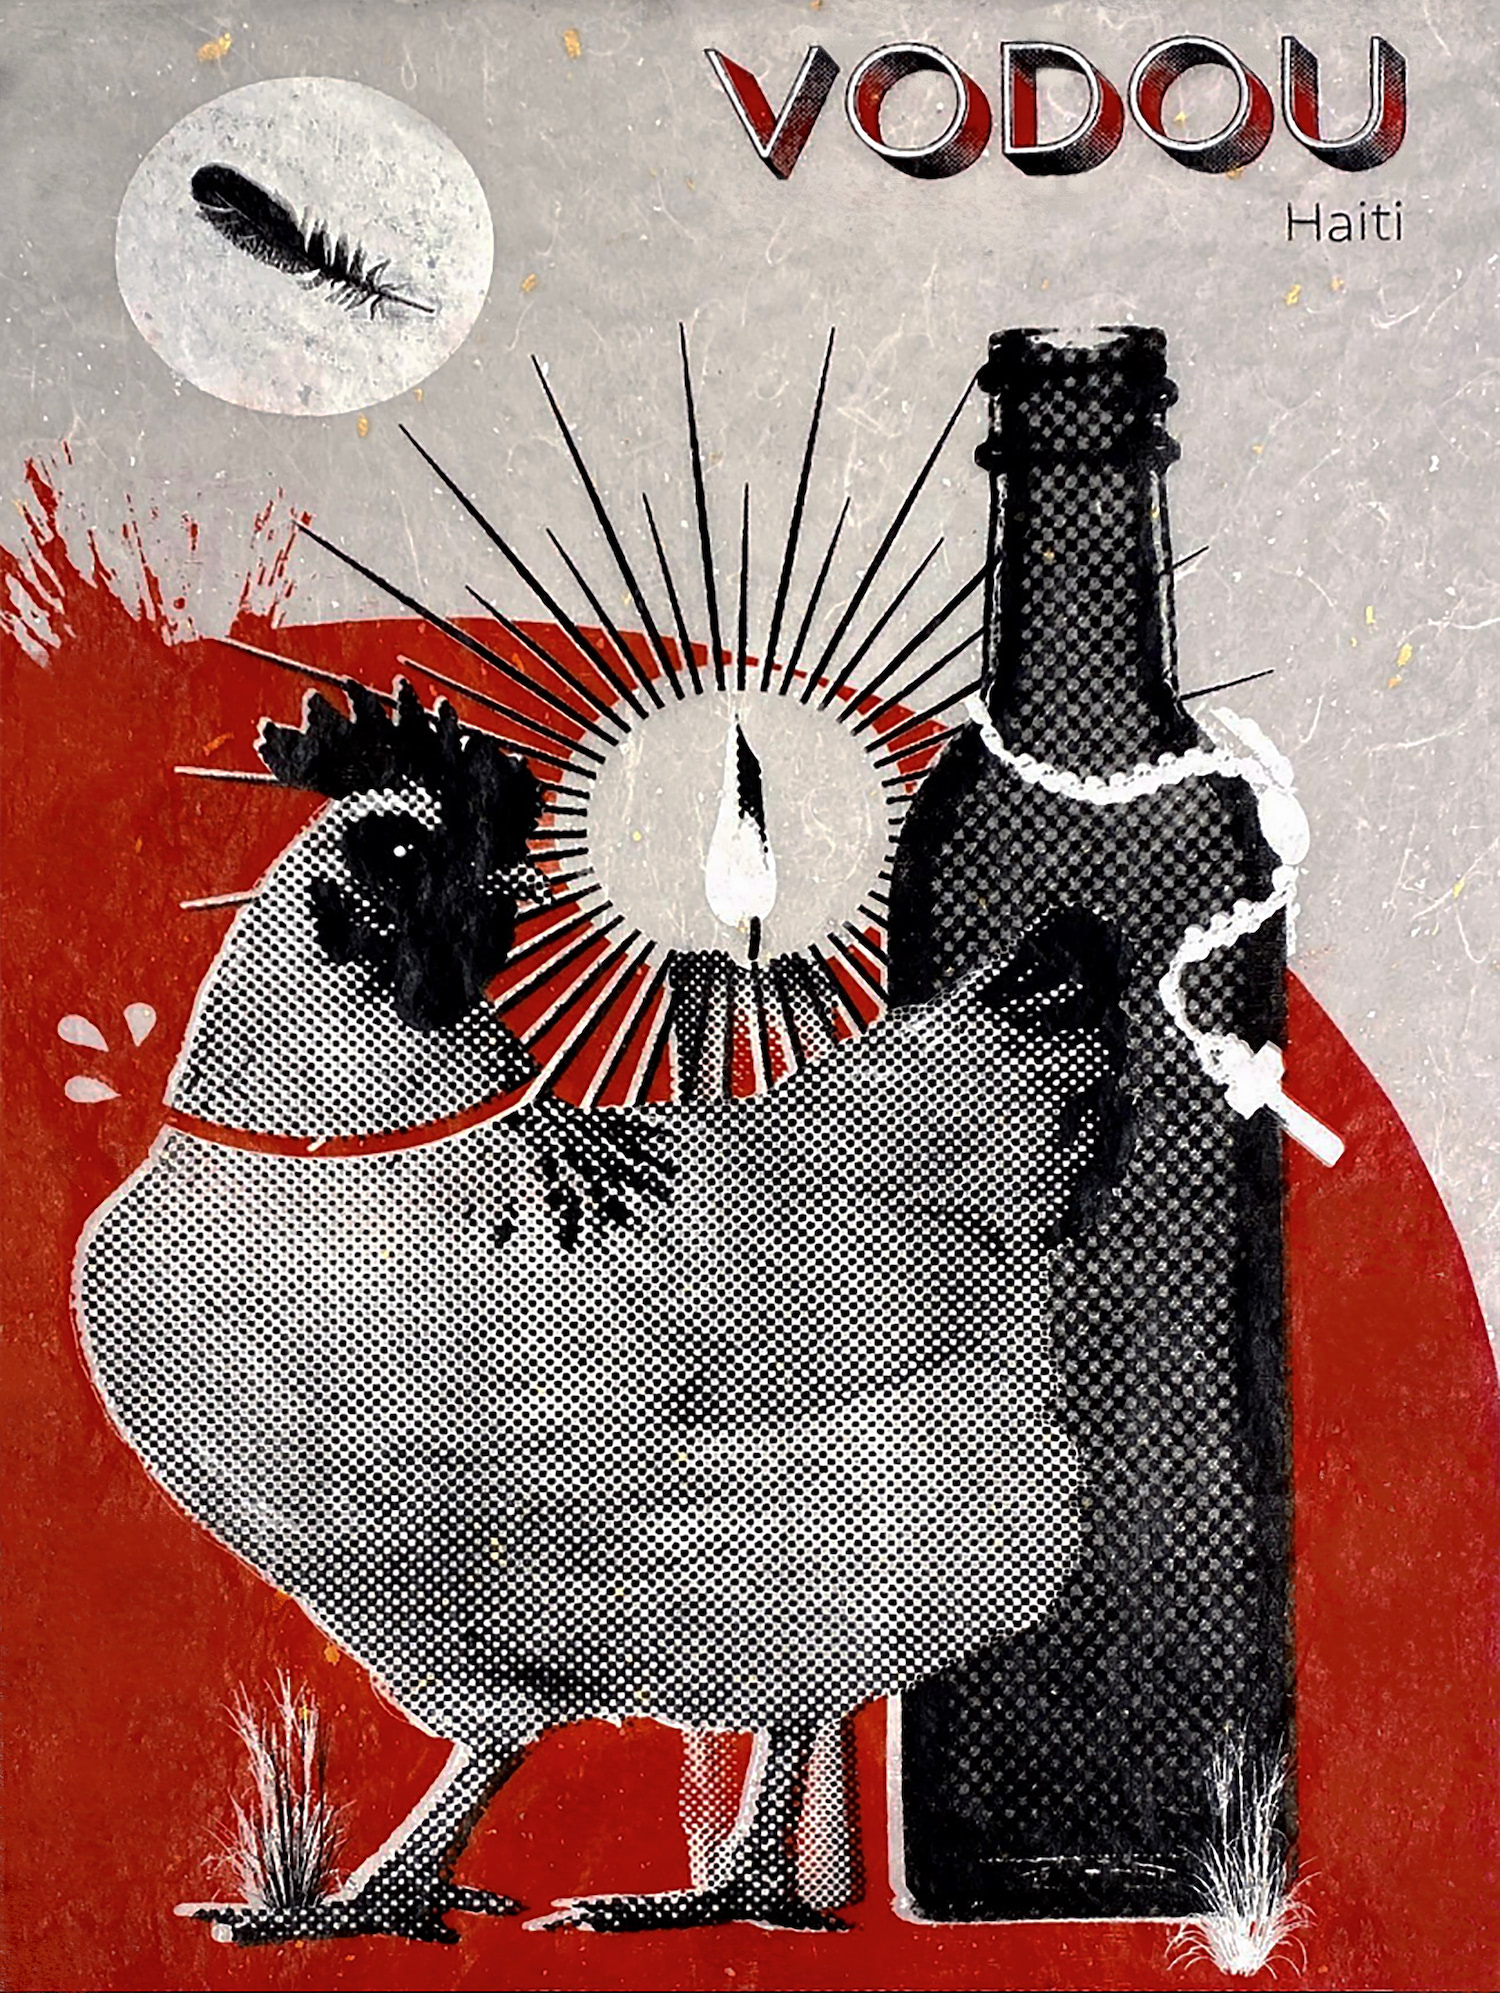 A white, black, and red print of a chicken, a candle, a bottle, and a rosary. The objects are surrounded by a red circle. At the top of the print is the word 